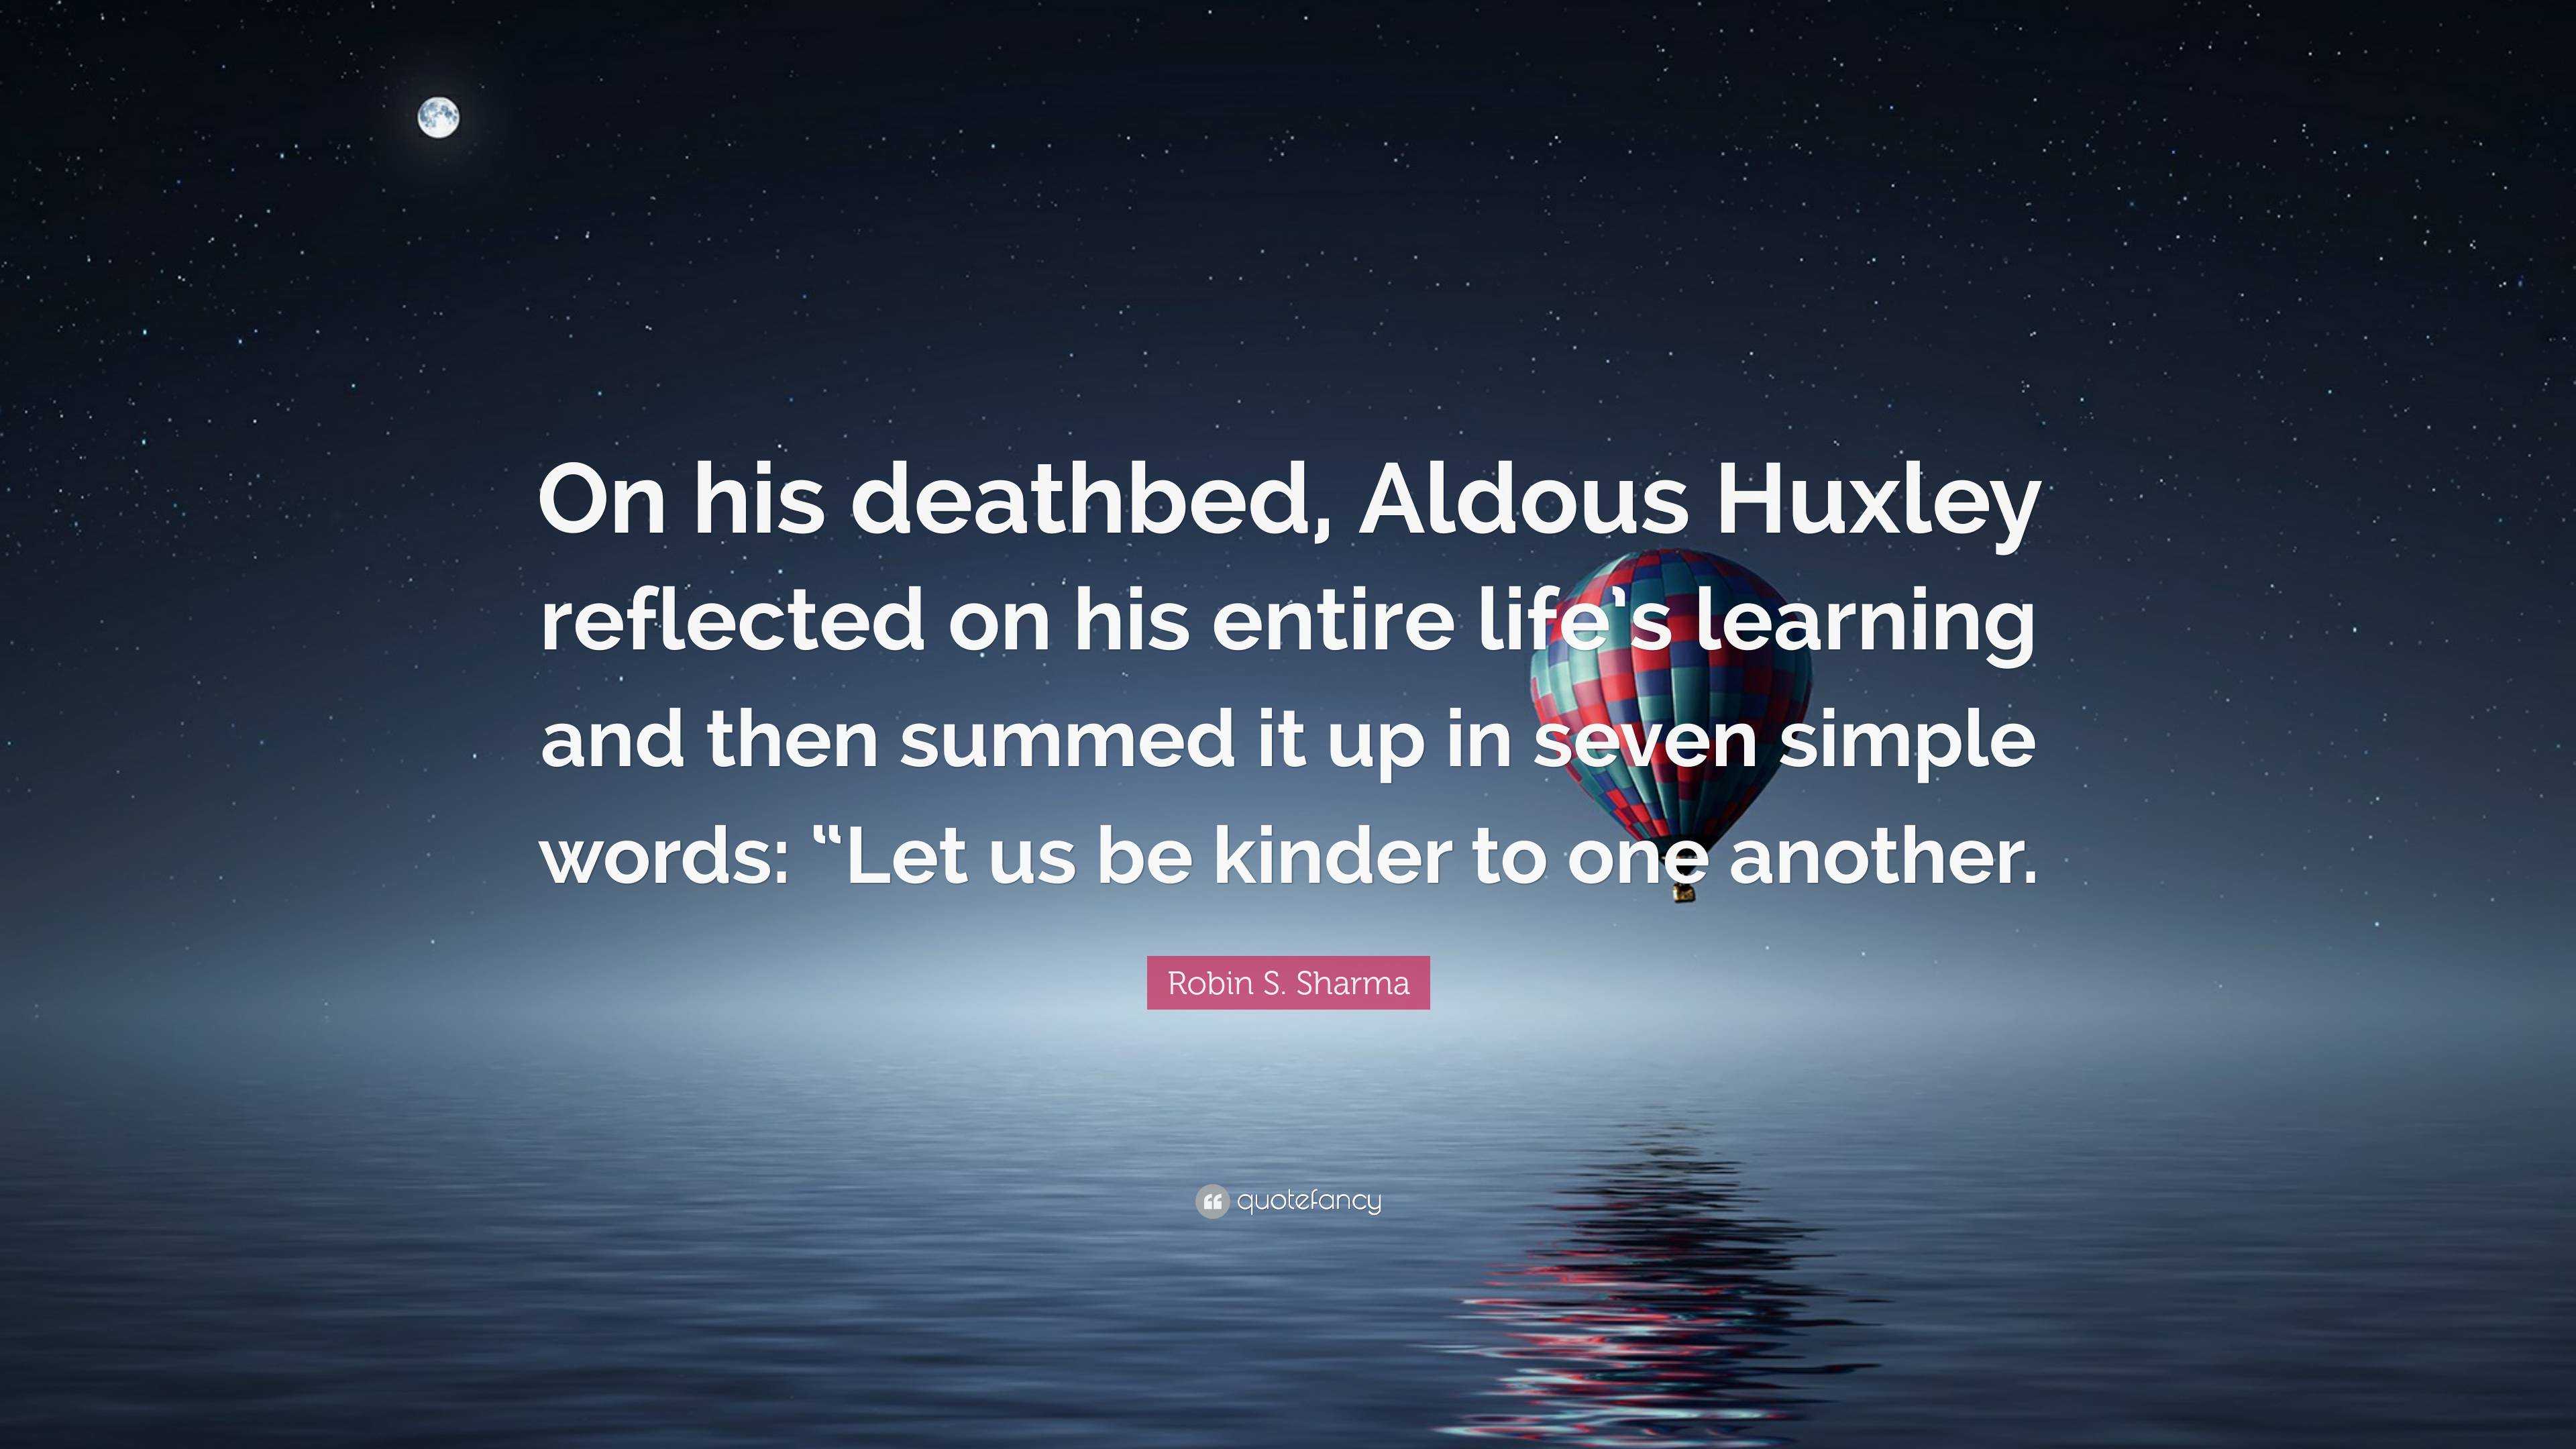 Robin S Sharma Quote On His Deathbed Aldous Huxley Reflected On His Entire Life S Learning And Then Summed It Up In Seven Simple Words Let